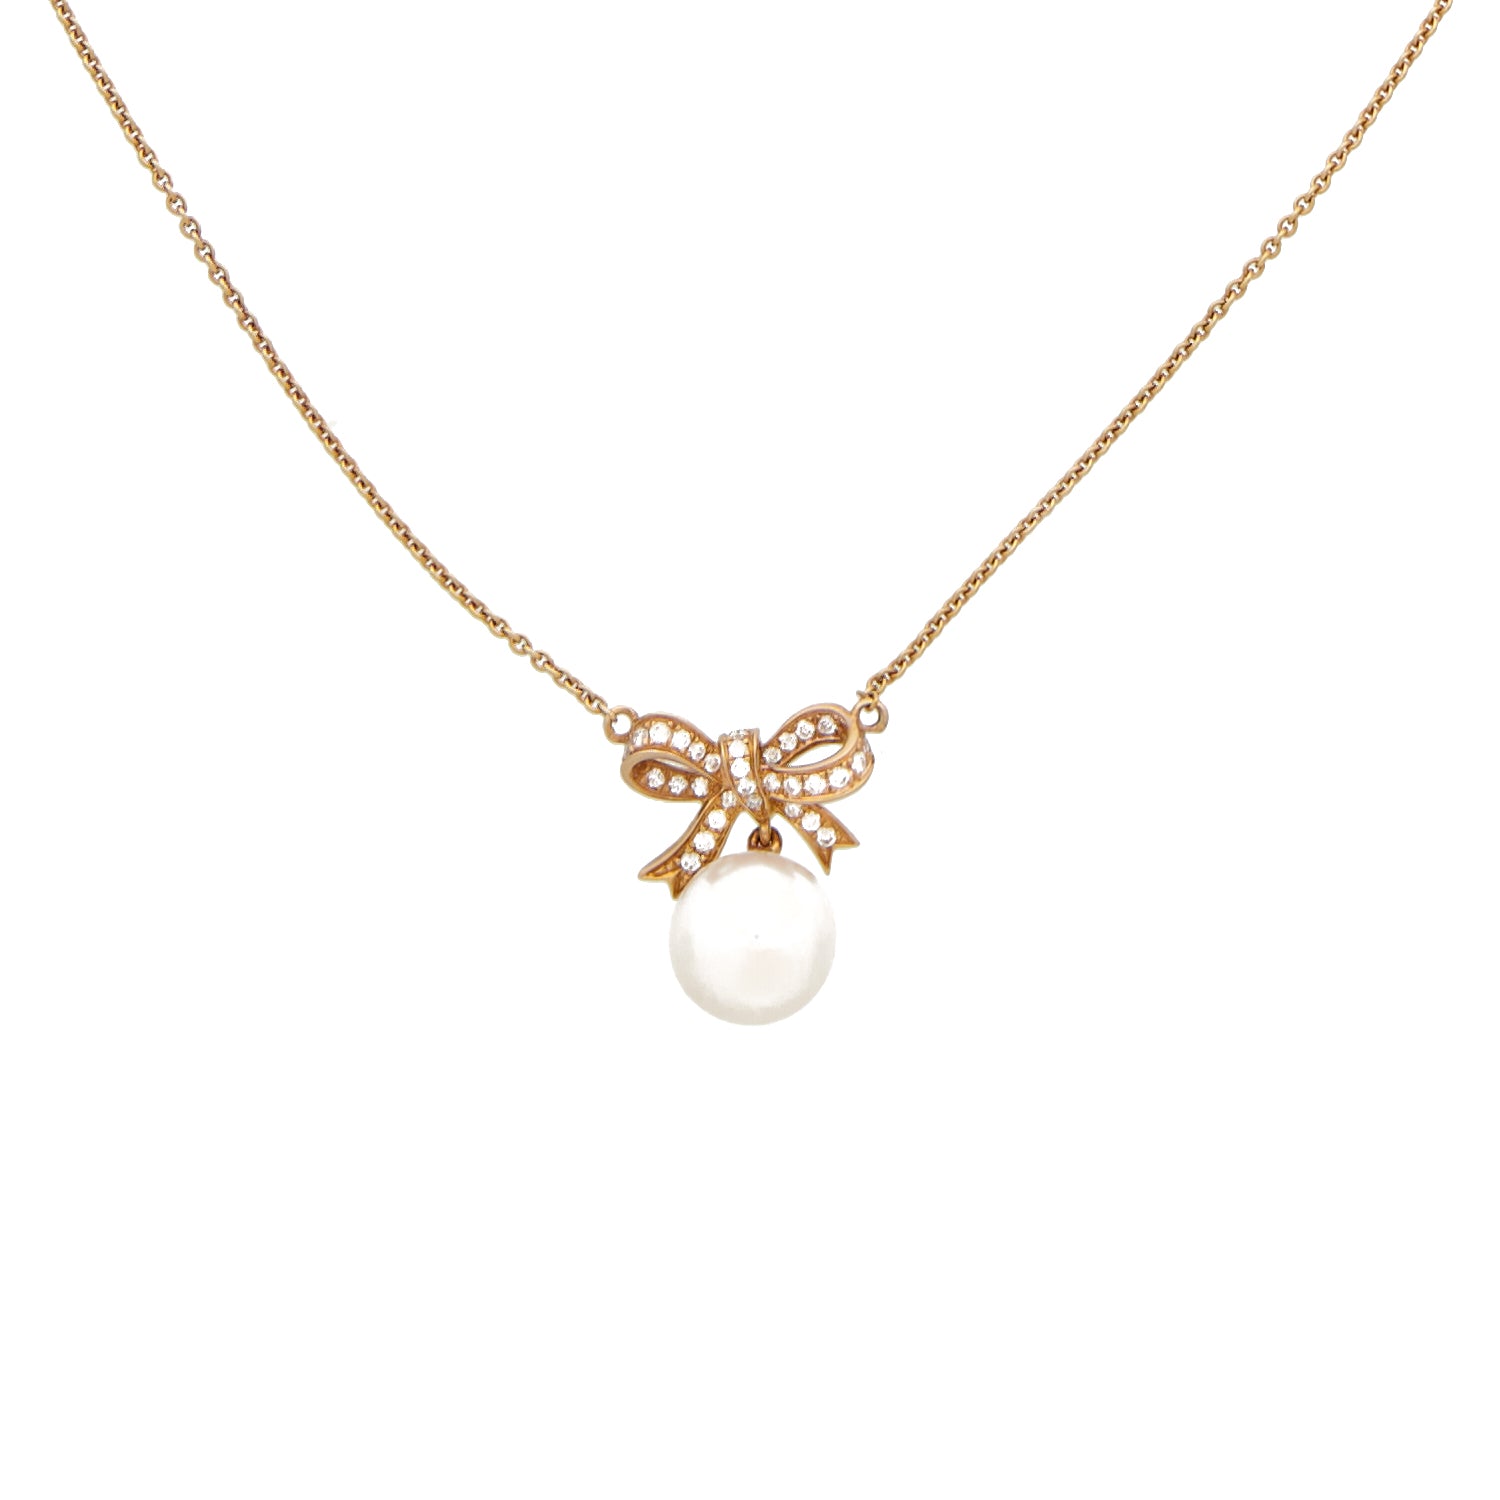 Rose gold necklace with pearl and bow